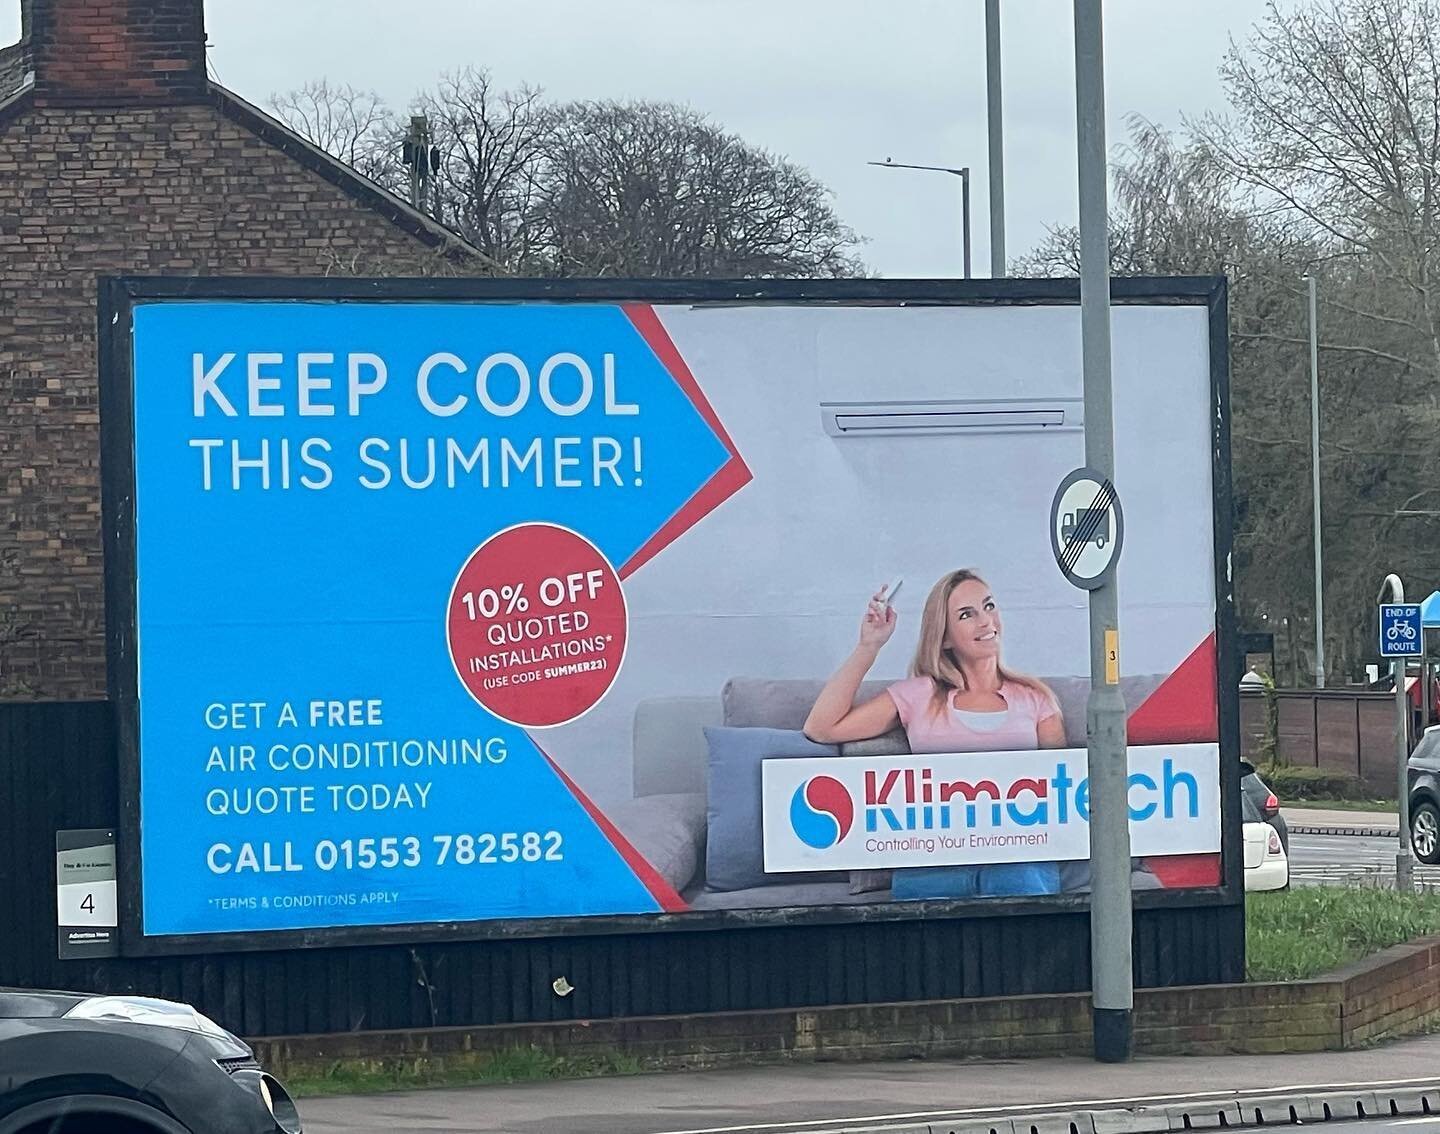 Our new Billboard is up at Southgates Roundabout!!